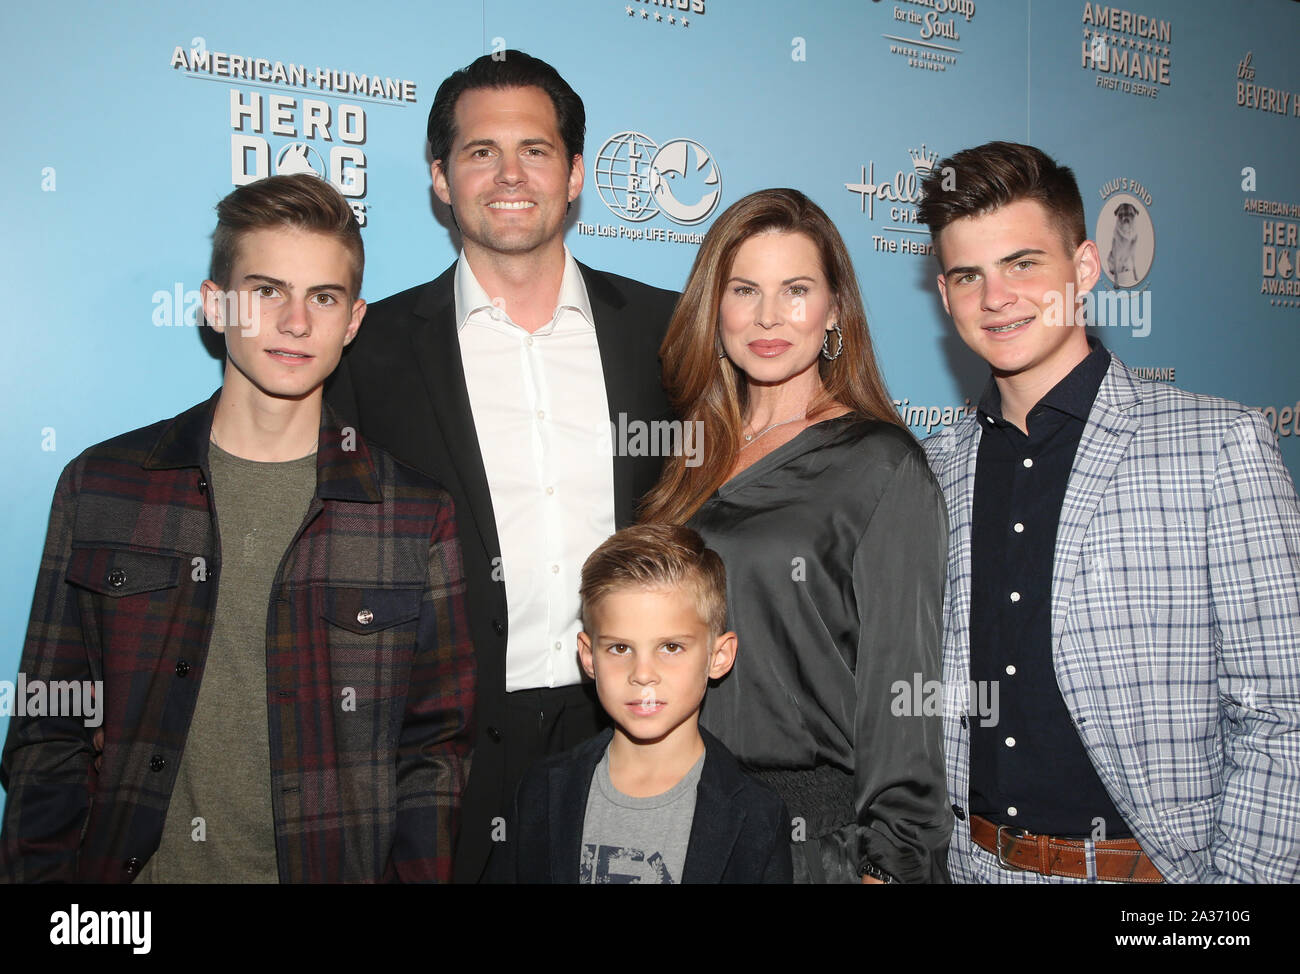 Beverly Hills, Ca. 5th Oct, 2019. Kristoffer Polaha, Julianne Morris, Micah Polaha, Kristoffer Caleb Polaha, Jude Polaha, 9th Annual American Humane Hero Dog Awards at The Beverly Hilton Hotel in Beverly Hills, California on October 5, 2019. Credit: Faye Sadou/Media Punch/Alamy Live News Stock Photo